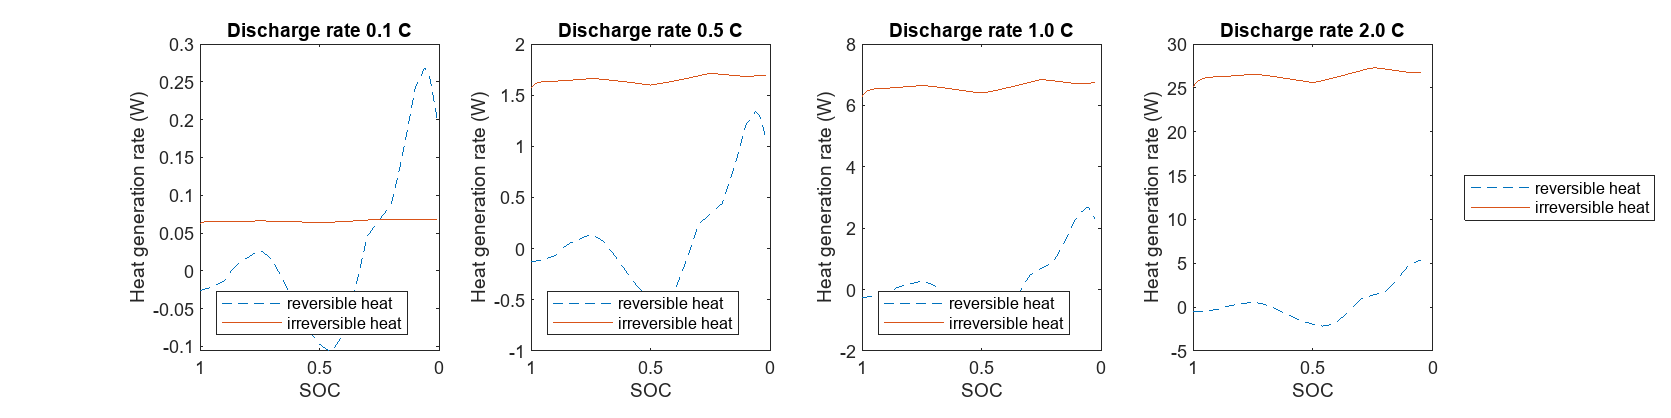 Figure contains 4 axes objects. Axes object 1 with title Discharge rate 0.1 C, xlabel SOC, ylabel Heat generation rate (W) contains 2 objects of type line. These objects represent reversible heat, irreversible heat. Axes object 2 with title Discharge rate 0.5 C, xlabel SOC, ylabel Heat generation rate (W) contains 2 objects of type line. These objects represent reversible heat, irreversible heat. Axes object 3 with title Discharge rate 1.0 C, xlabel SOC, ylabel Heat generation rate (W) contains 2 objects of type line. These objects represent reversible heat, irreversible heat. Axes object 4 with title Discharge rate 2.0 C, xlabel SOC, ylabel Heat generation rate (W) contains 2 objects of type line. These objects represent reversible heat, irreversible heat.